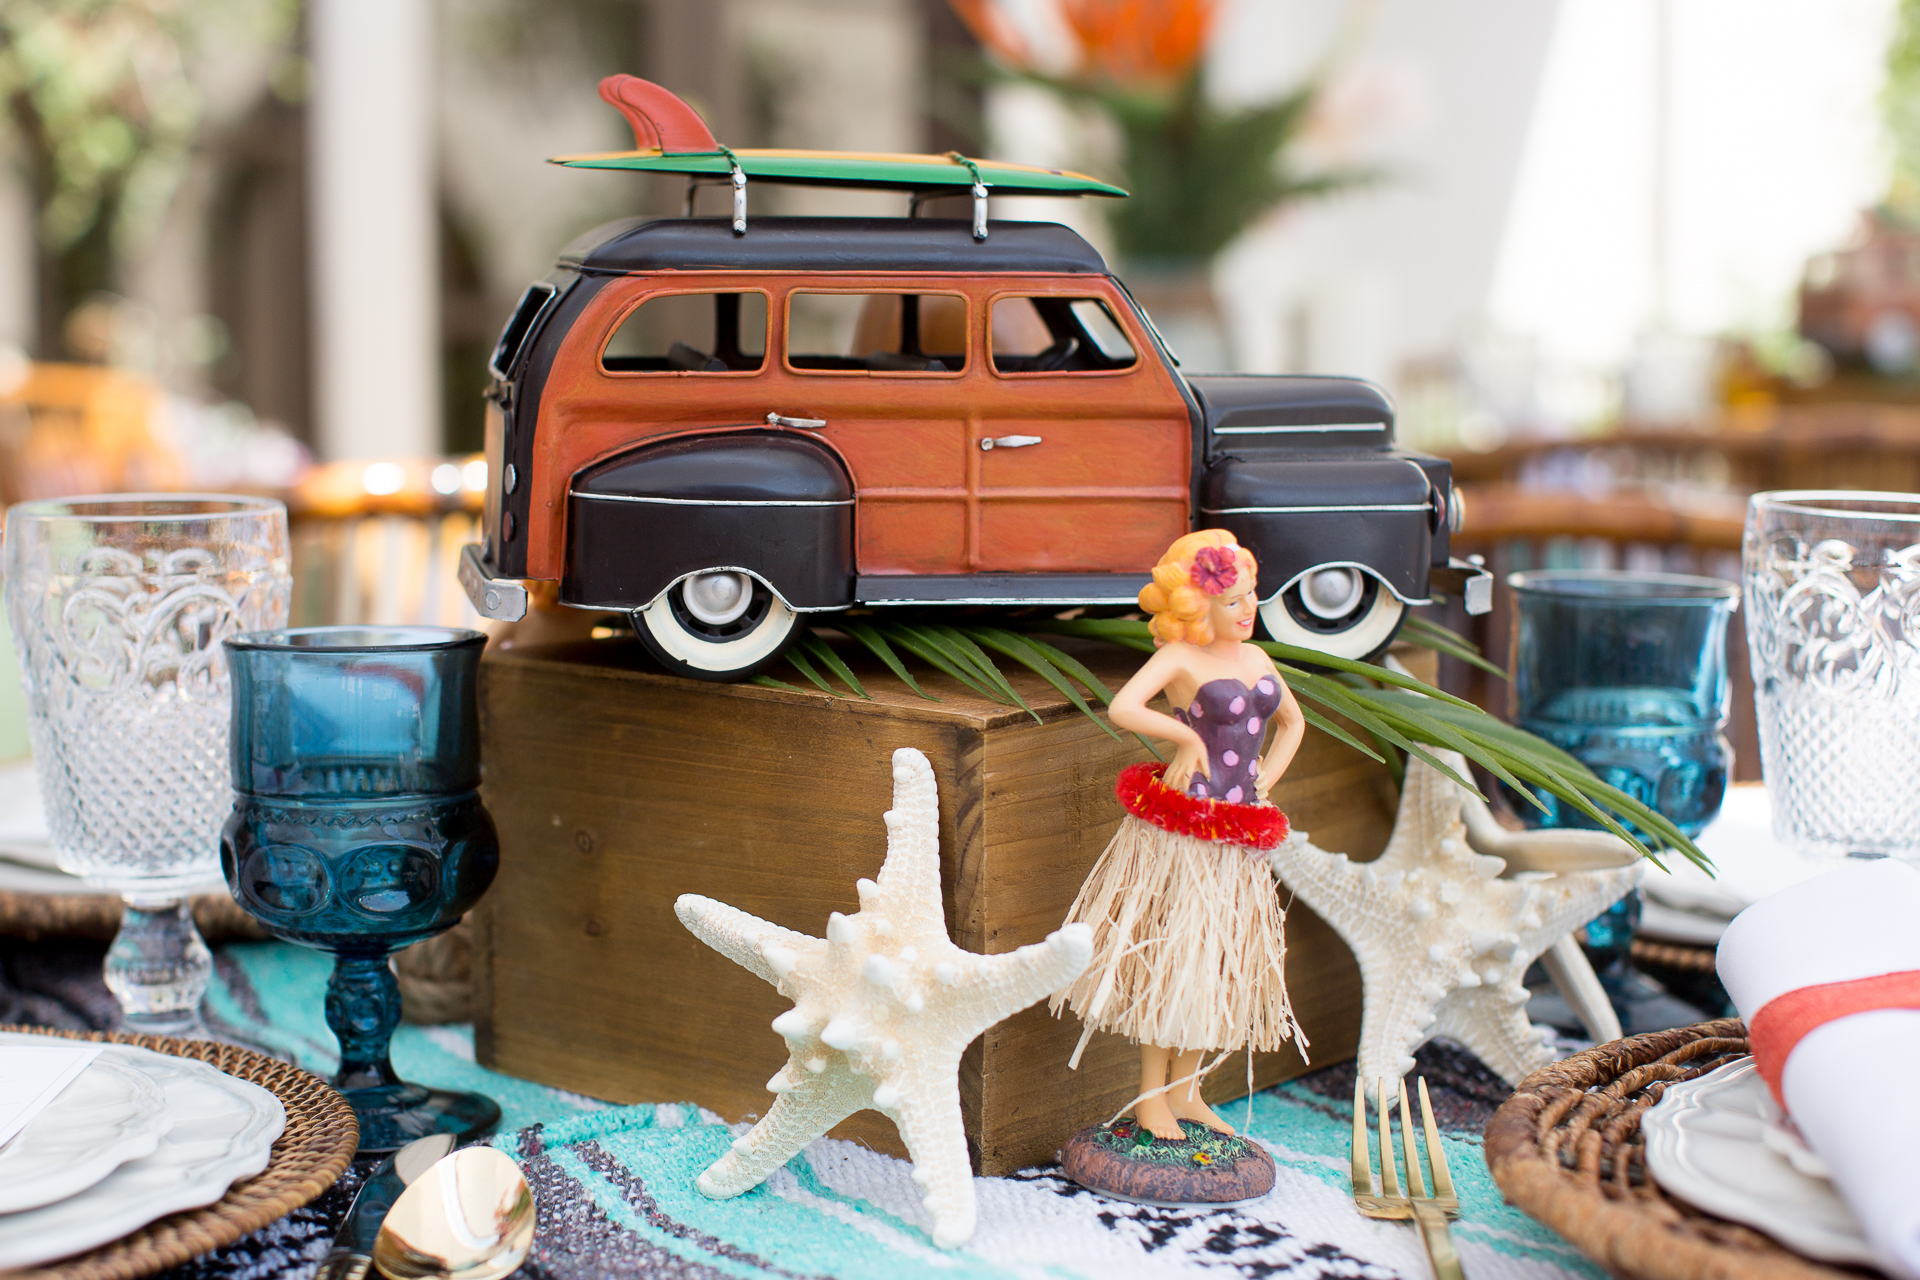 A vintage surfer inspired rental collection! Hang loose with our vintage mini VW buses, pin up dashboard girls, touches of Tiki, palm leaves and tropical faux florals.